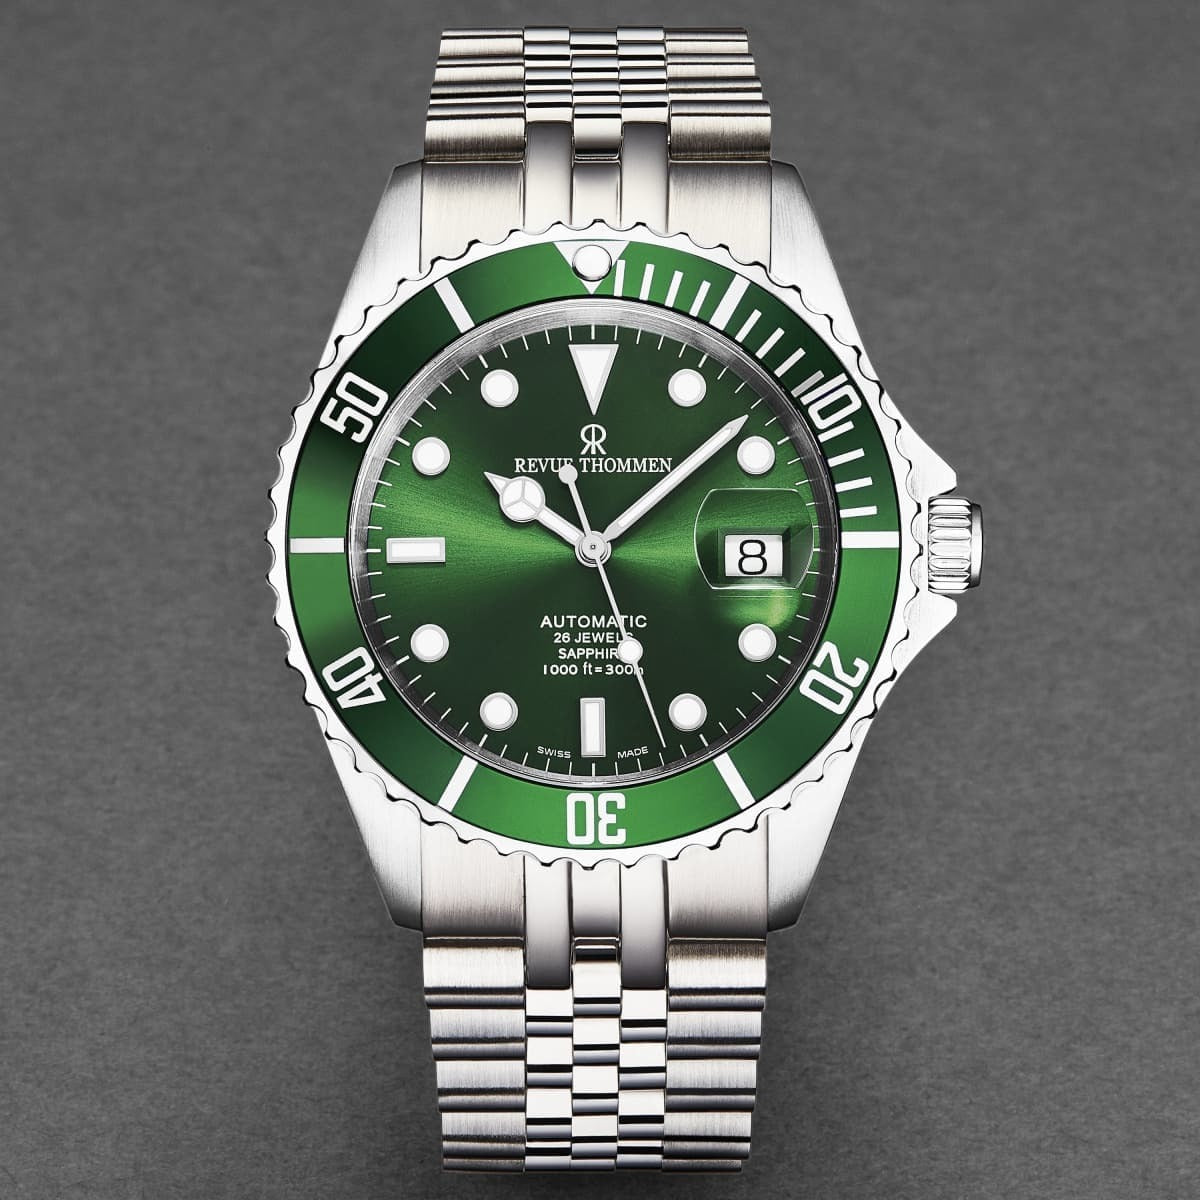 A Revue Thommen Men's 'Diver' Black Dial Stainless Steel Bracelet Automatic Watch 17571.2234 with a green dial.